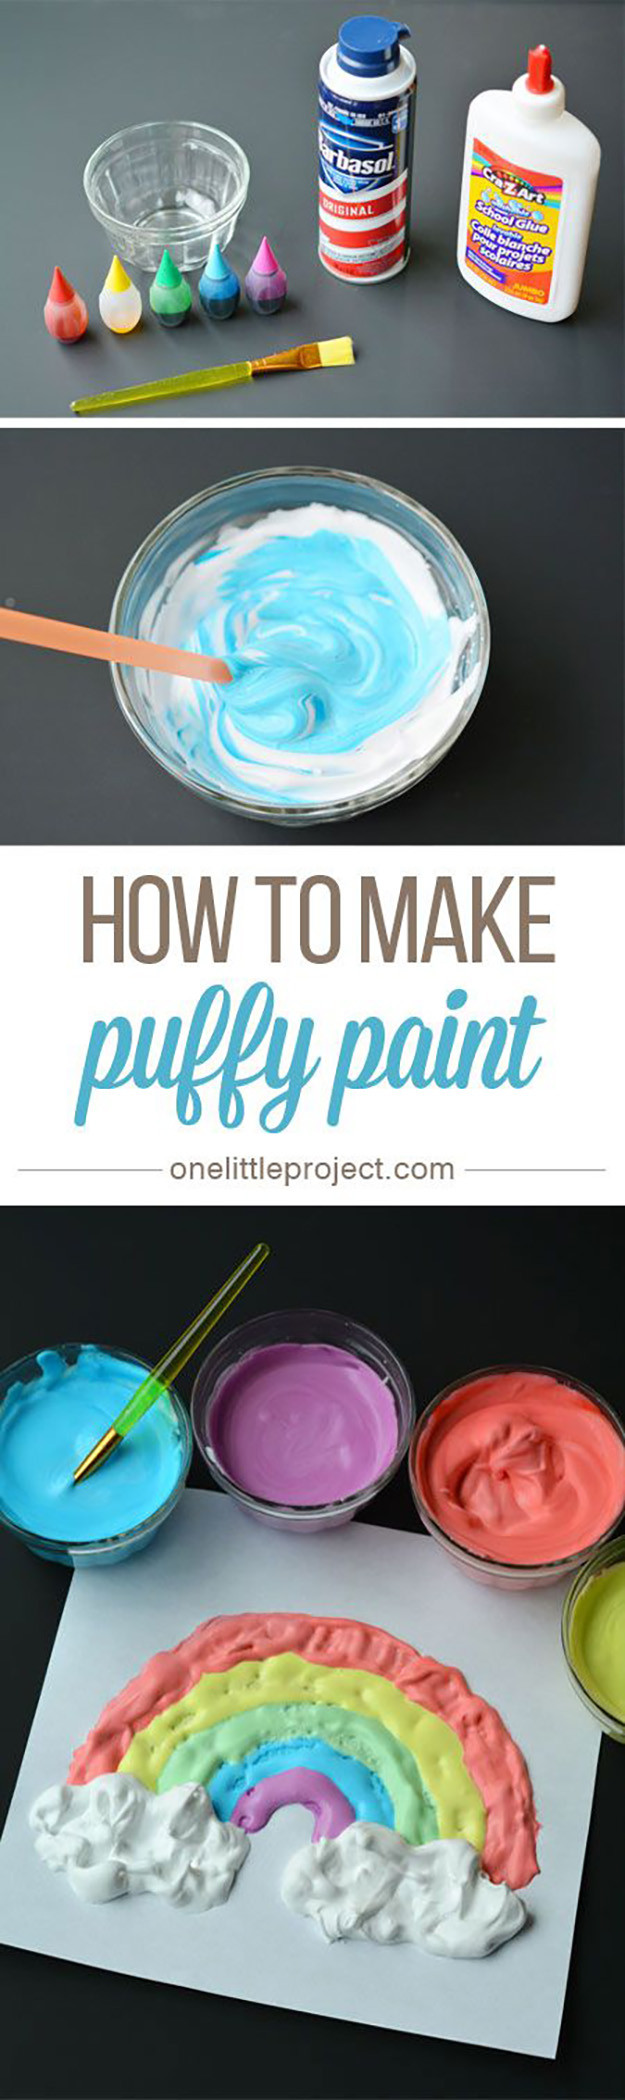 DIY Painting For Kids
 21 DIY Paint Recipes To Make For the Kids